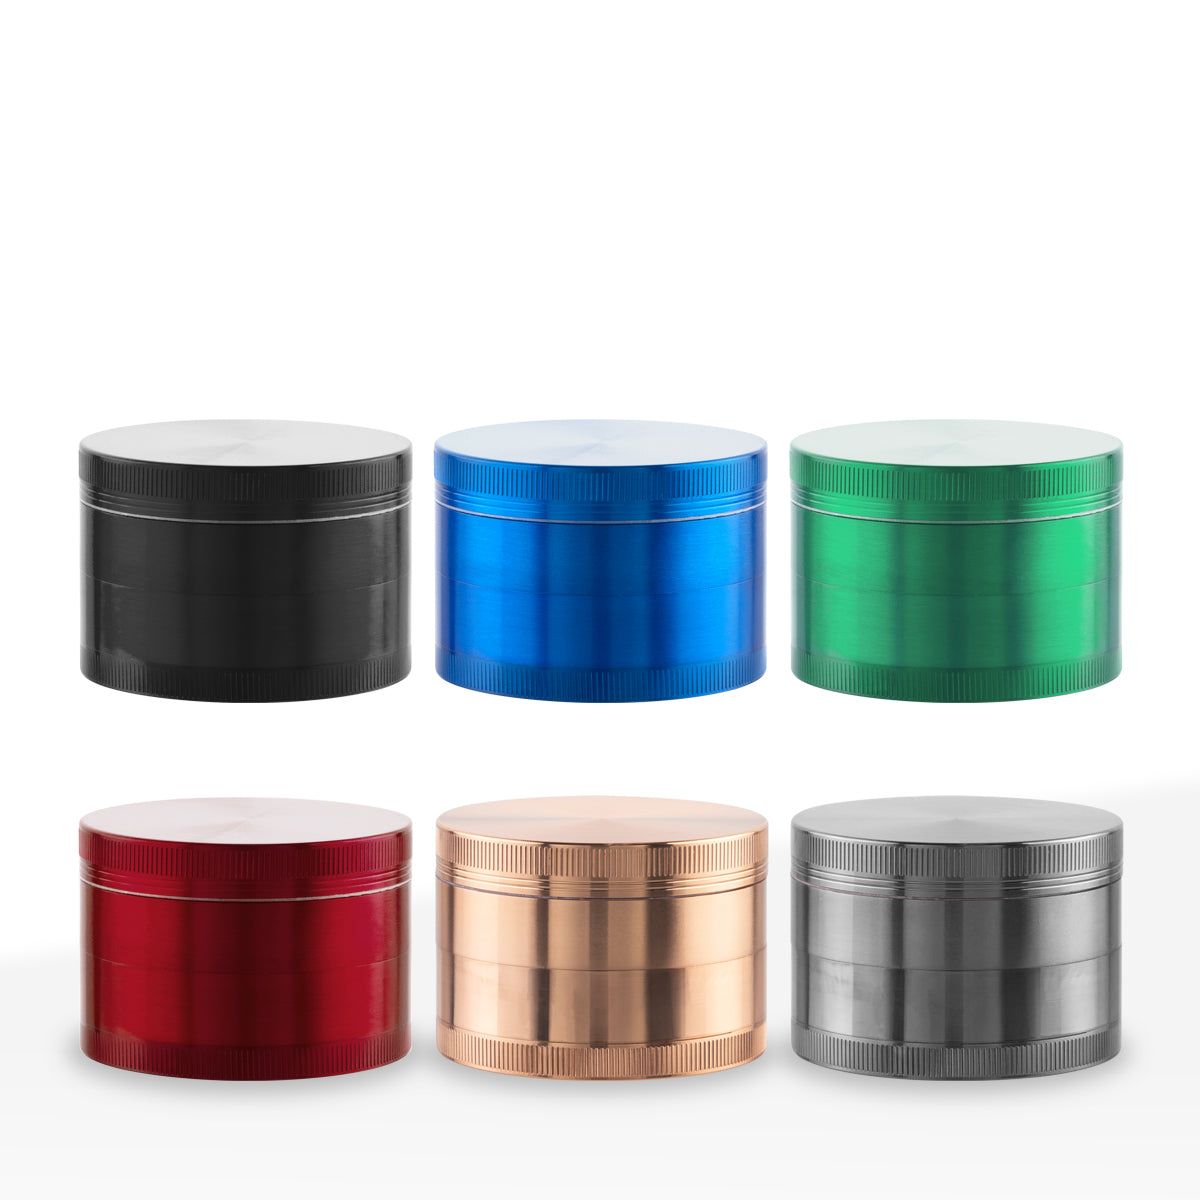 Grinder | Anodized Aluminum Alloy Magnetic Grinder | 63mm x 44mm - 4 Piece - Assorted Colors - 6 Count